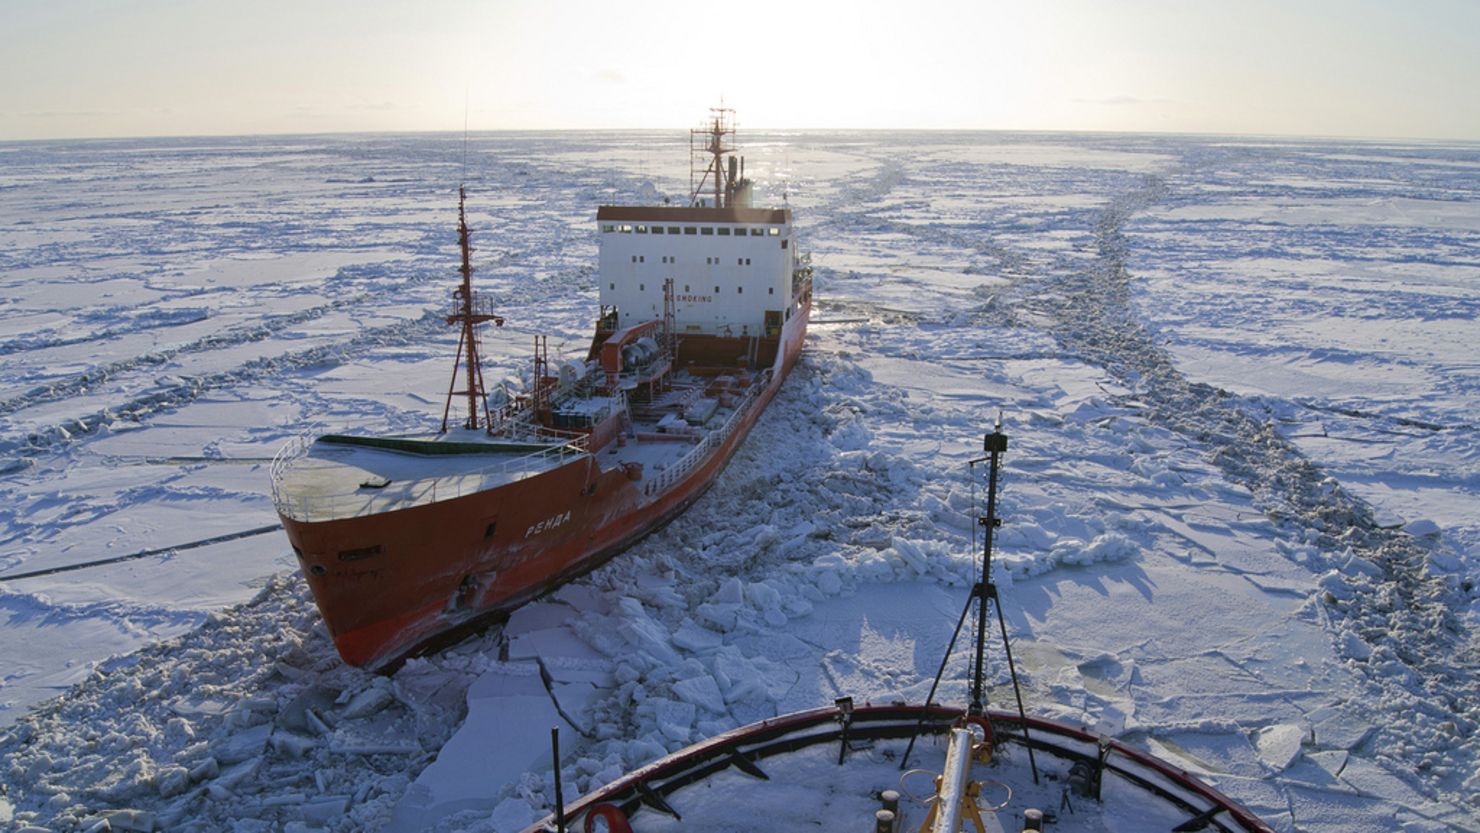 BERING SEA ? The Russian-flagged tanker Renda, carrying more than 1.3 million gallons of fuel, sits in the ice while the Coast Guard Cutter Healy crew breaks the ice around the tanker approximately 19 miles northwest of Nunivak Island Jan. 6, 2012. The cutter Healy crew is escorting the Renda crew to Nome, Alaska, where the tanker crew will offload the needed fuel to the city. U.S. Coast Guard photo by cutter Healy.